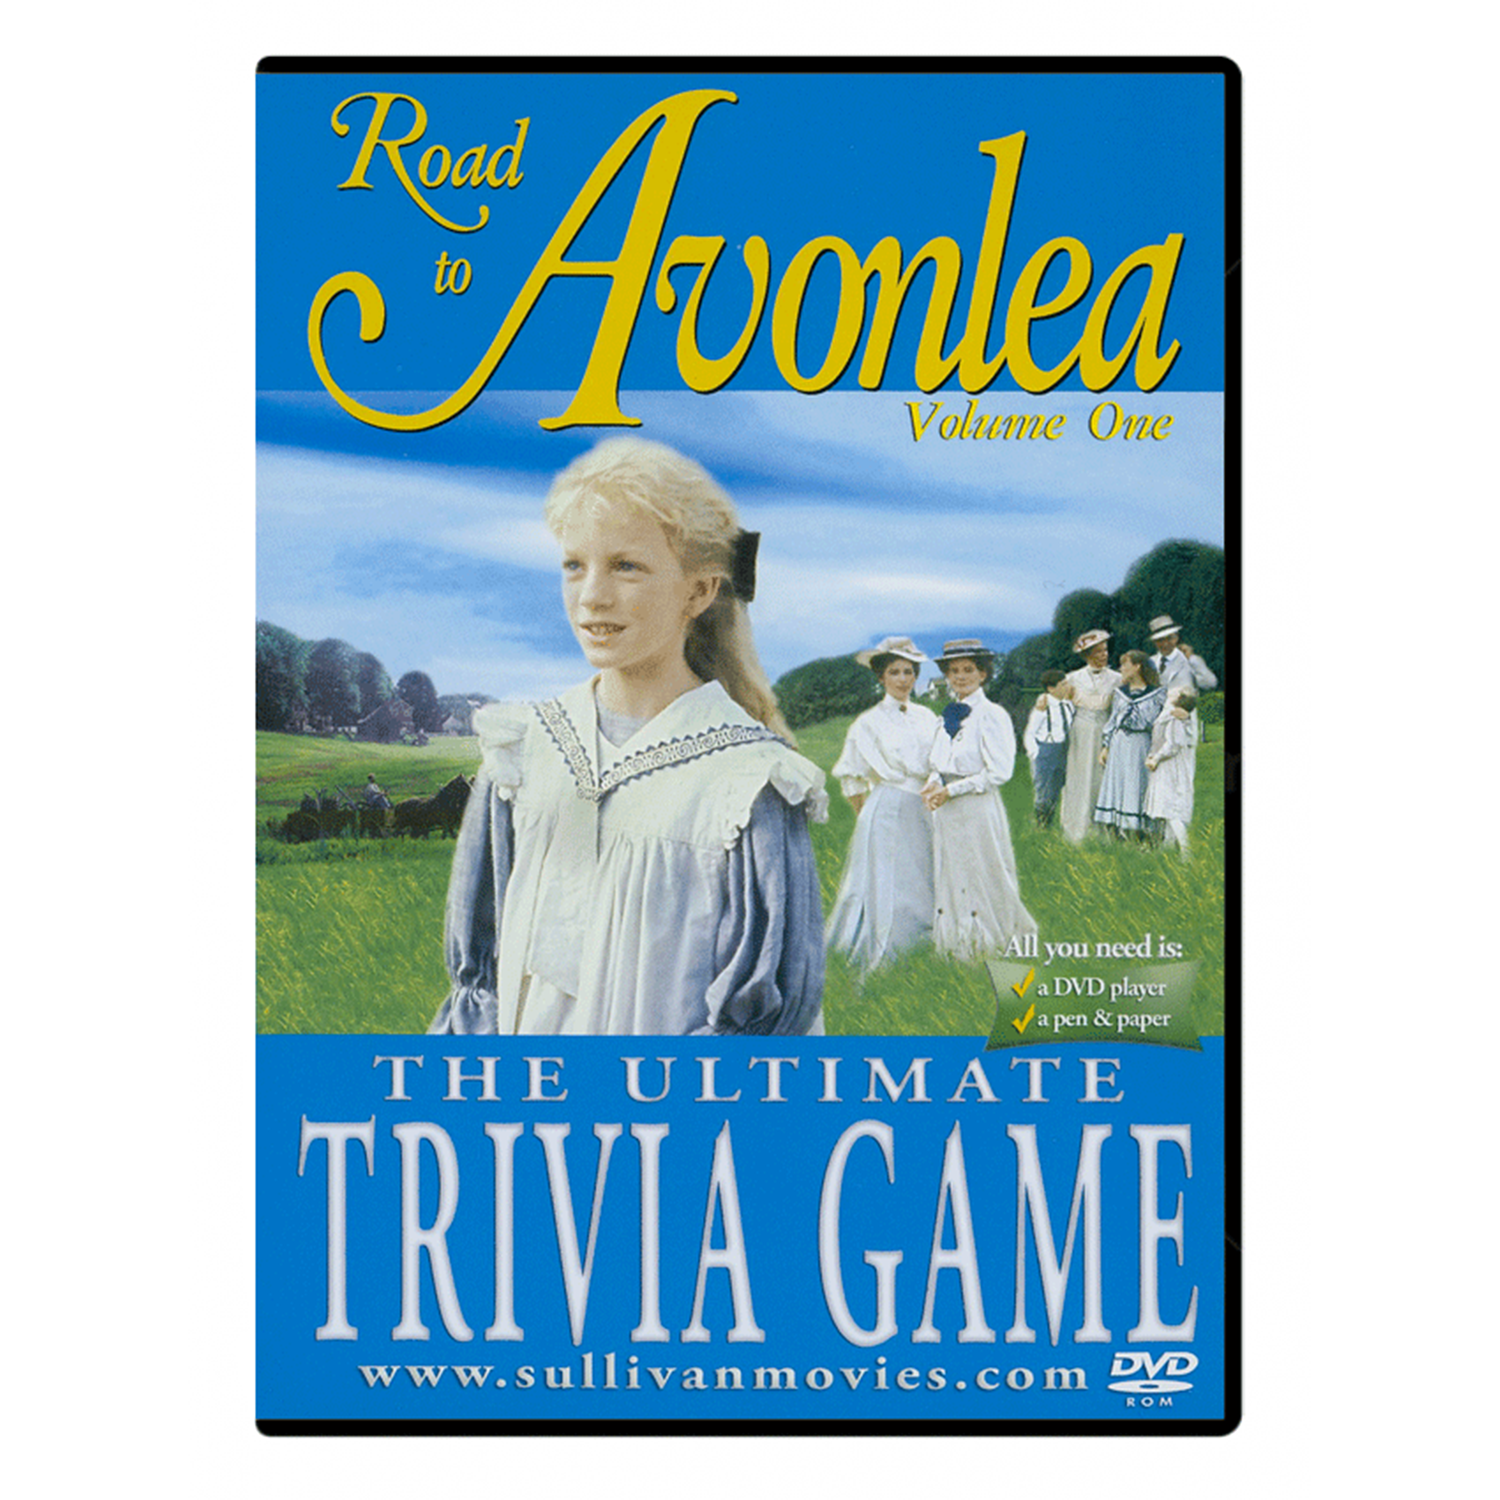 Road to Avonlea: The Ultimate Trivia Game Standard Fullscreen-For The Entire Family